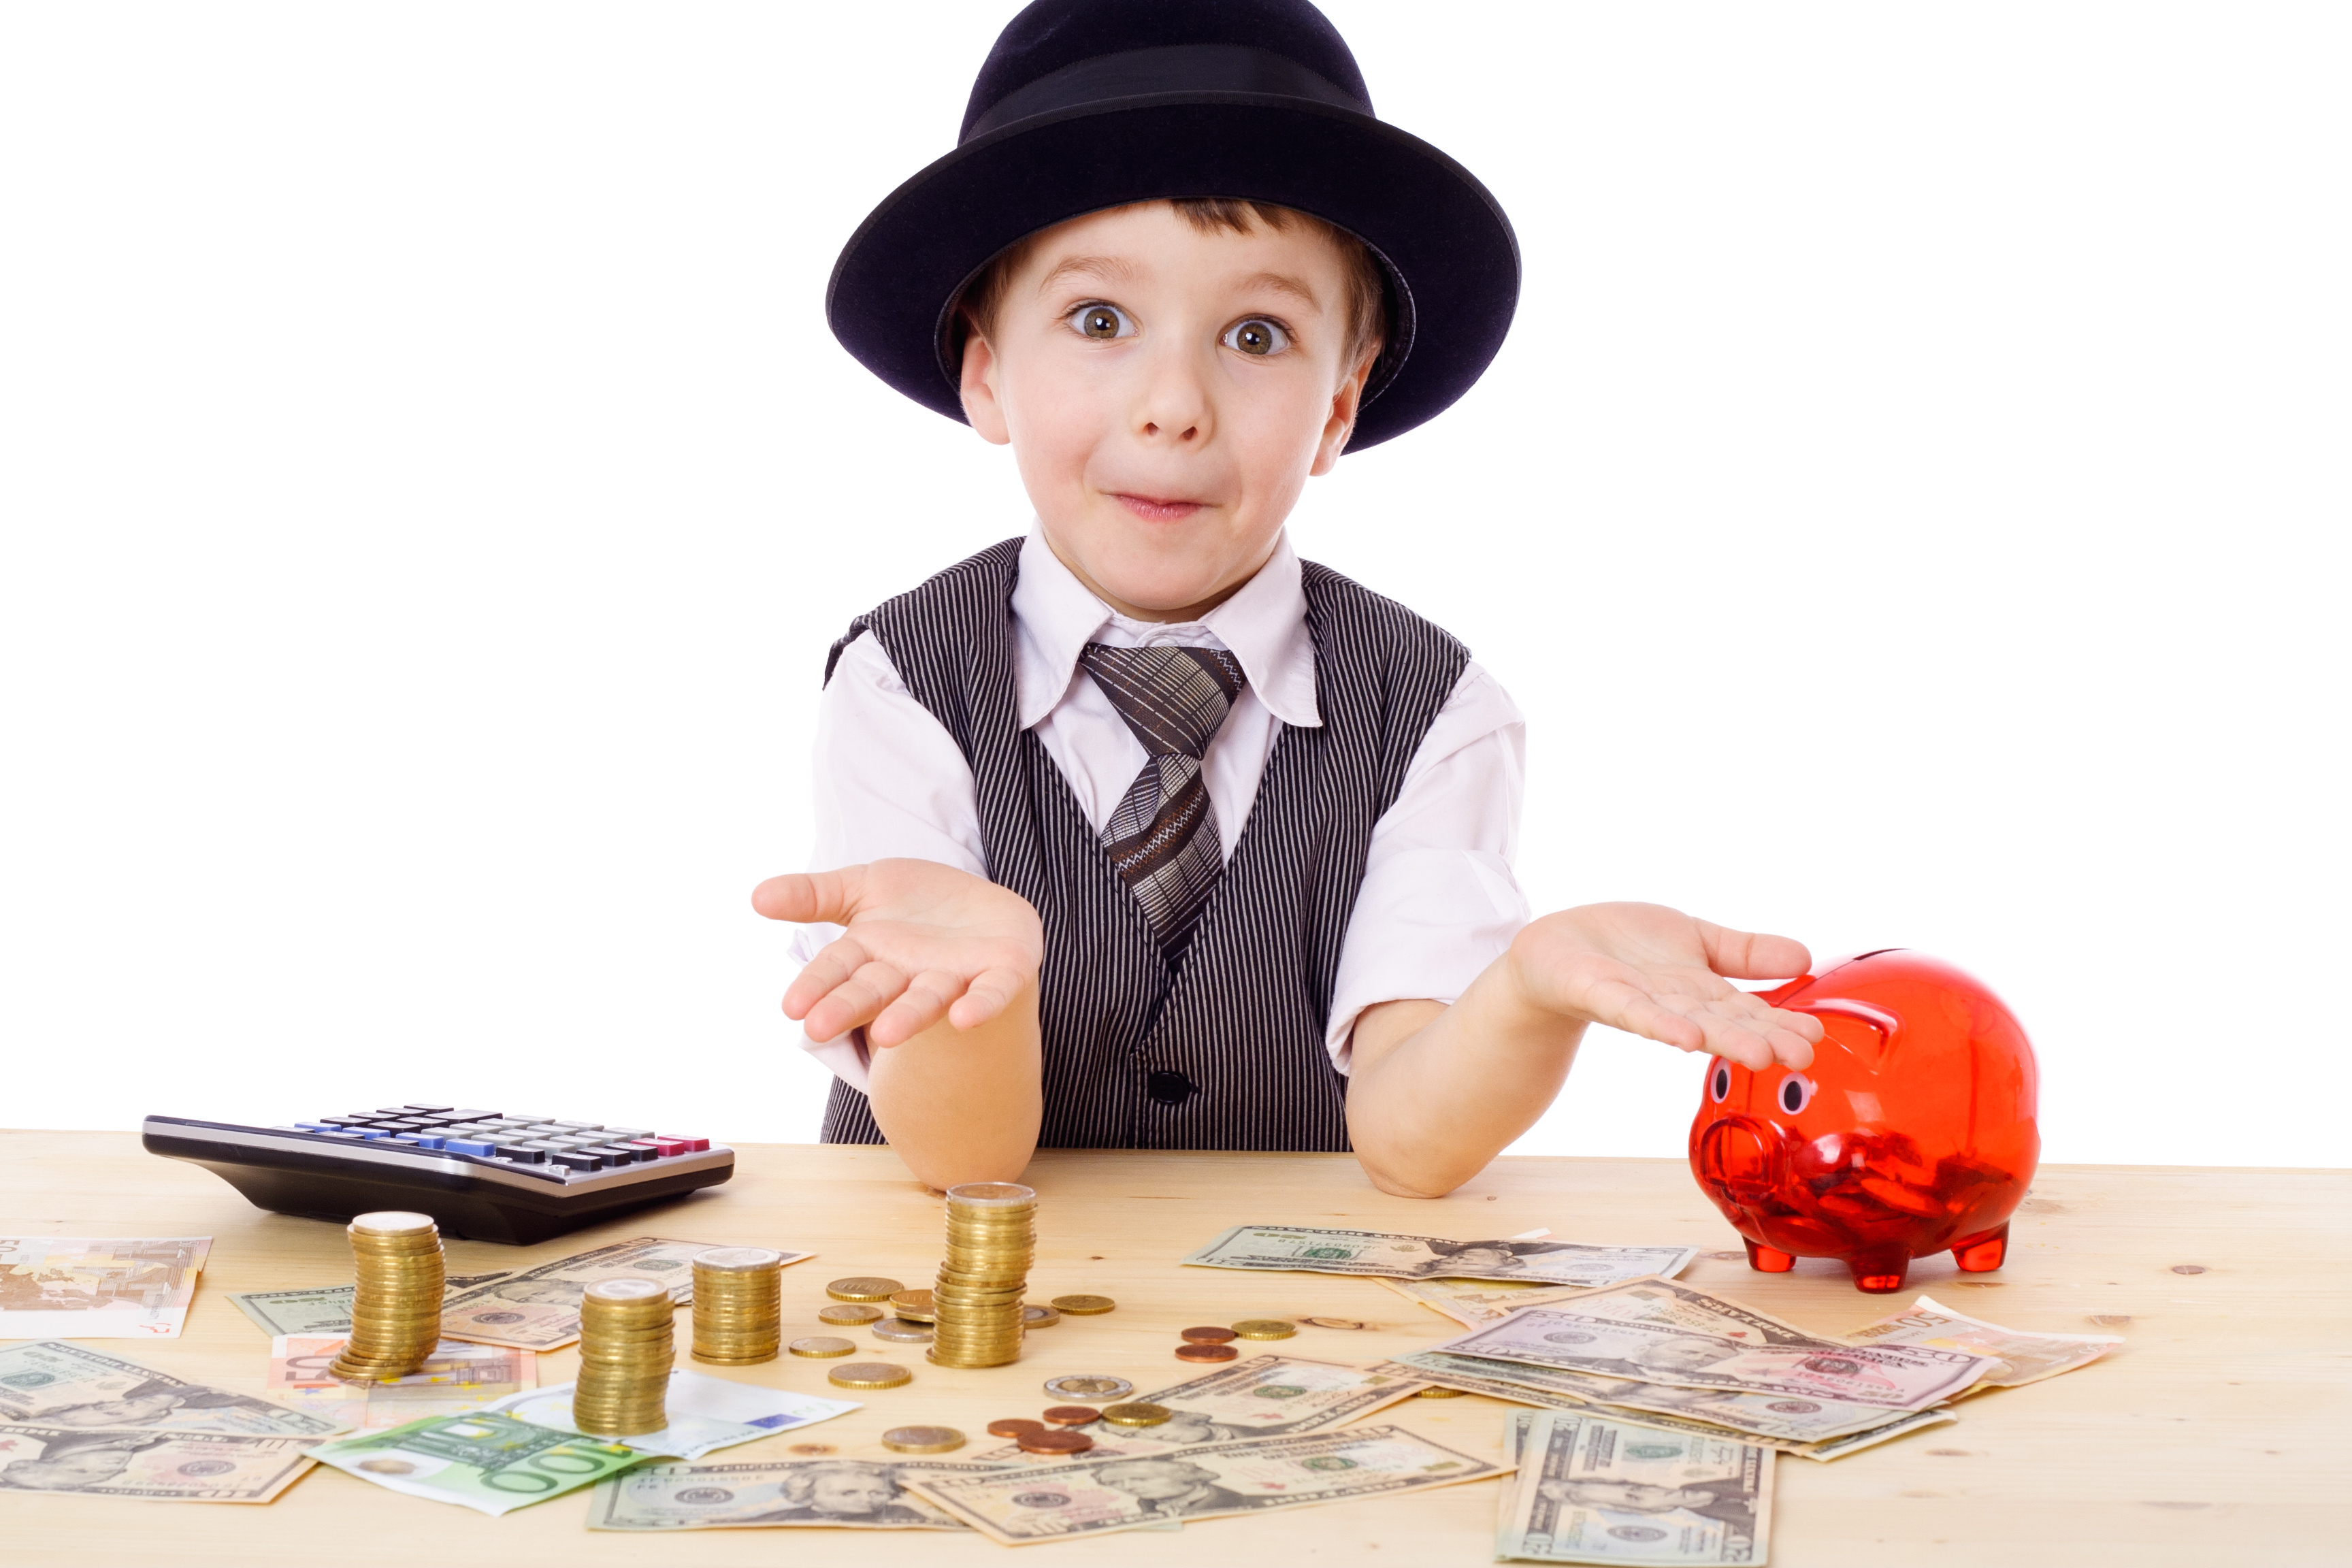 Sly boy in black hat with empty hands at the table with pile of money, isolated on white